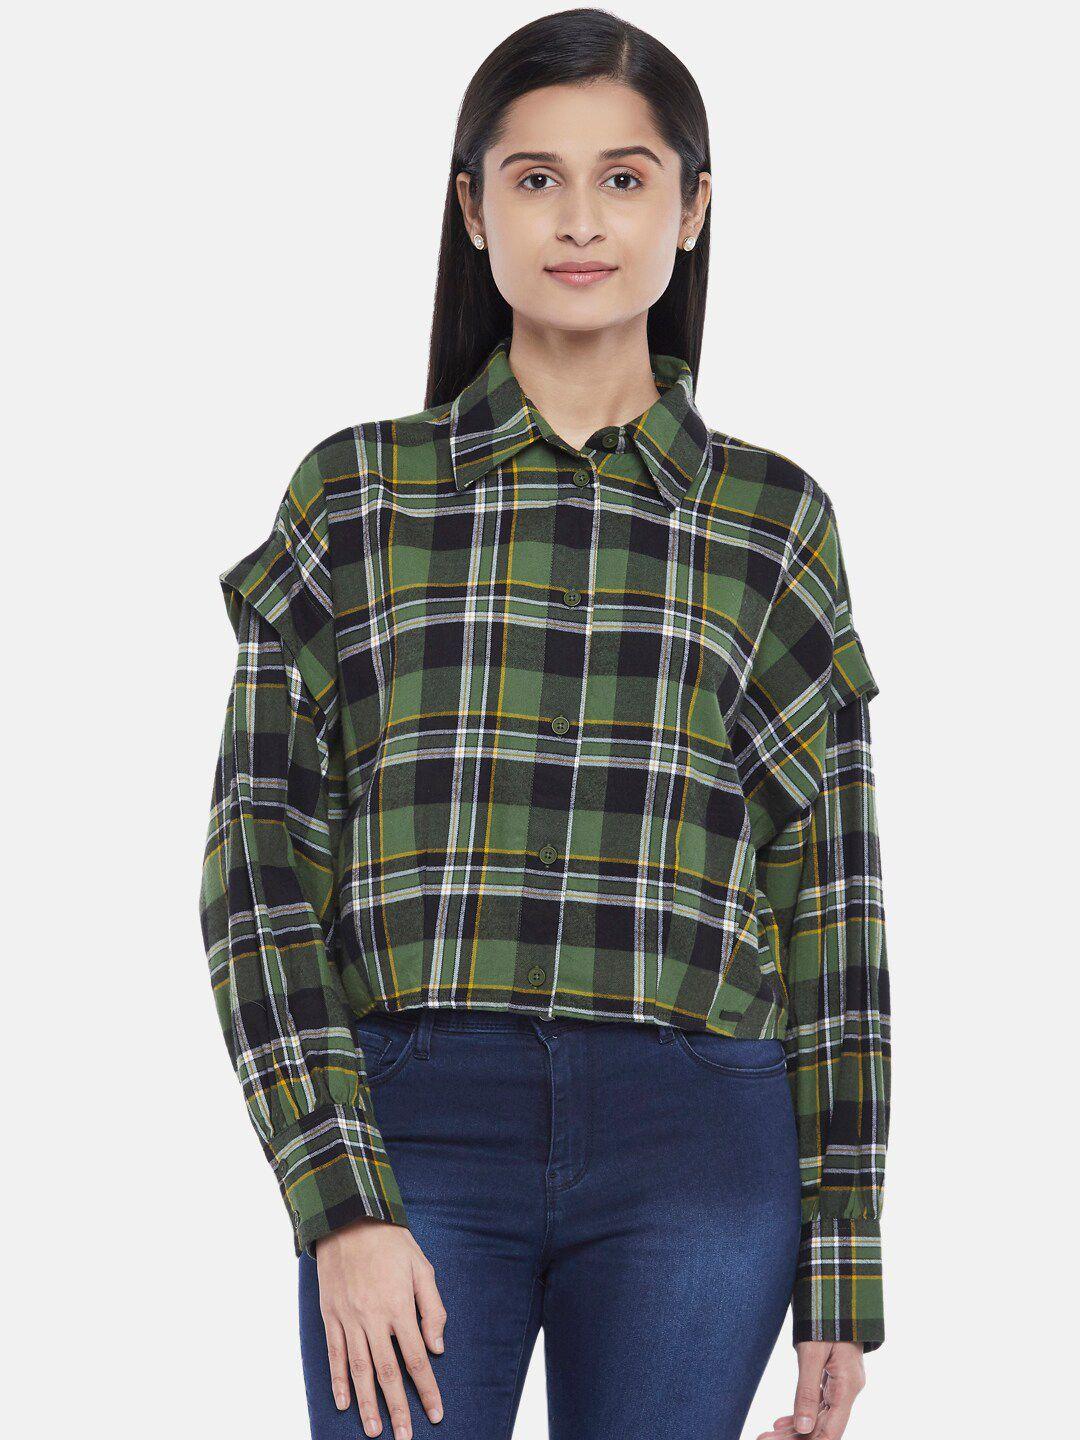 sf-jeans-by-pantaloons-women-olive-green-tartan-checked-regular-fit-casual-shirt